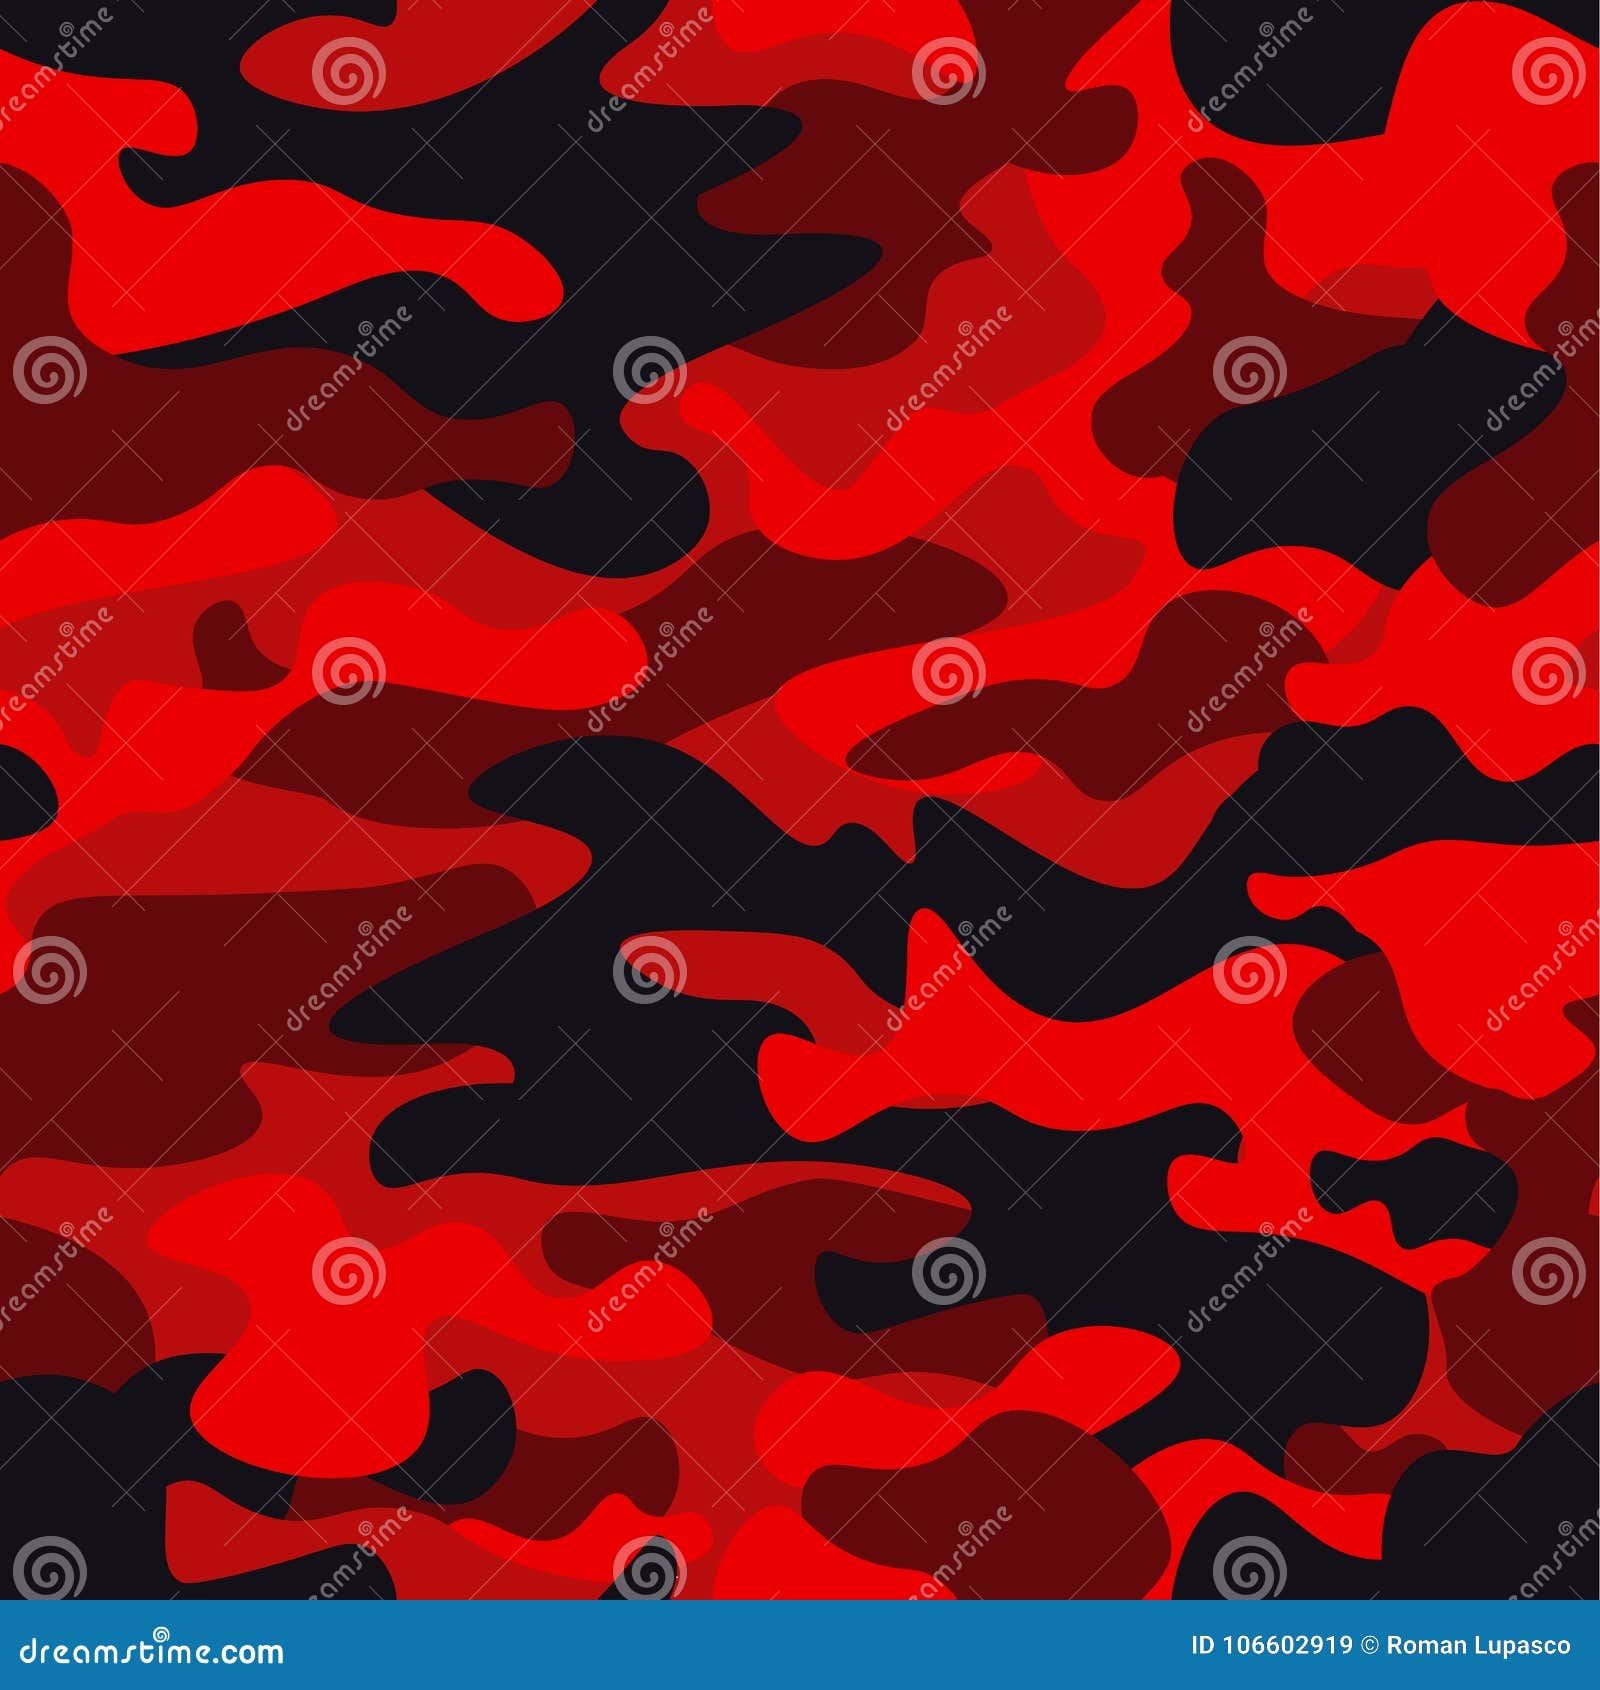 Camouflage Military Background. Camo Bright Red Print Texture - Vector ...